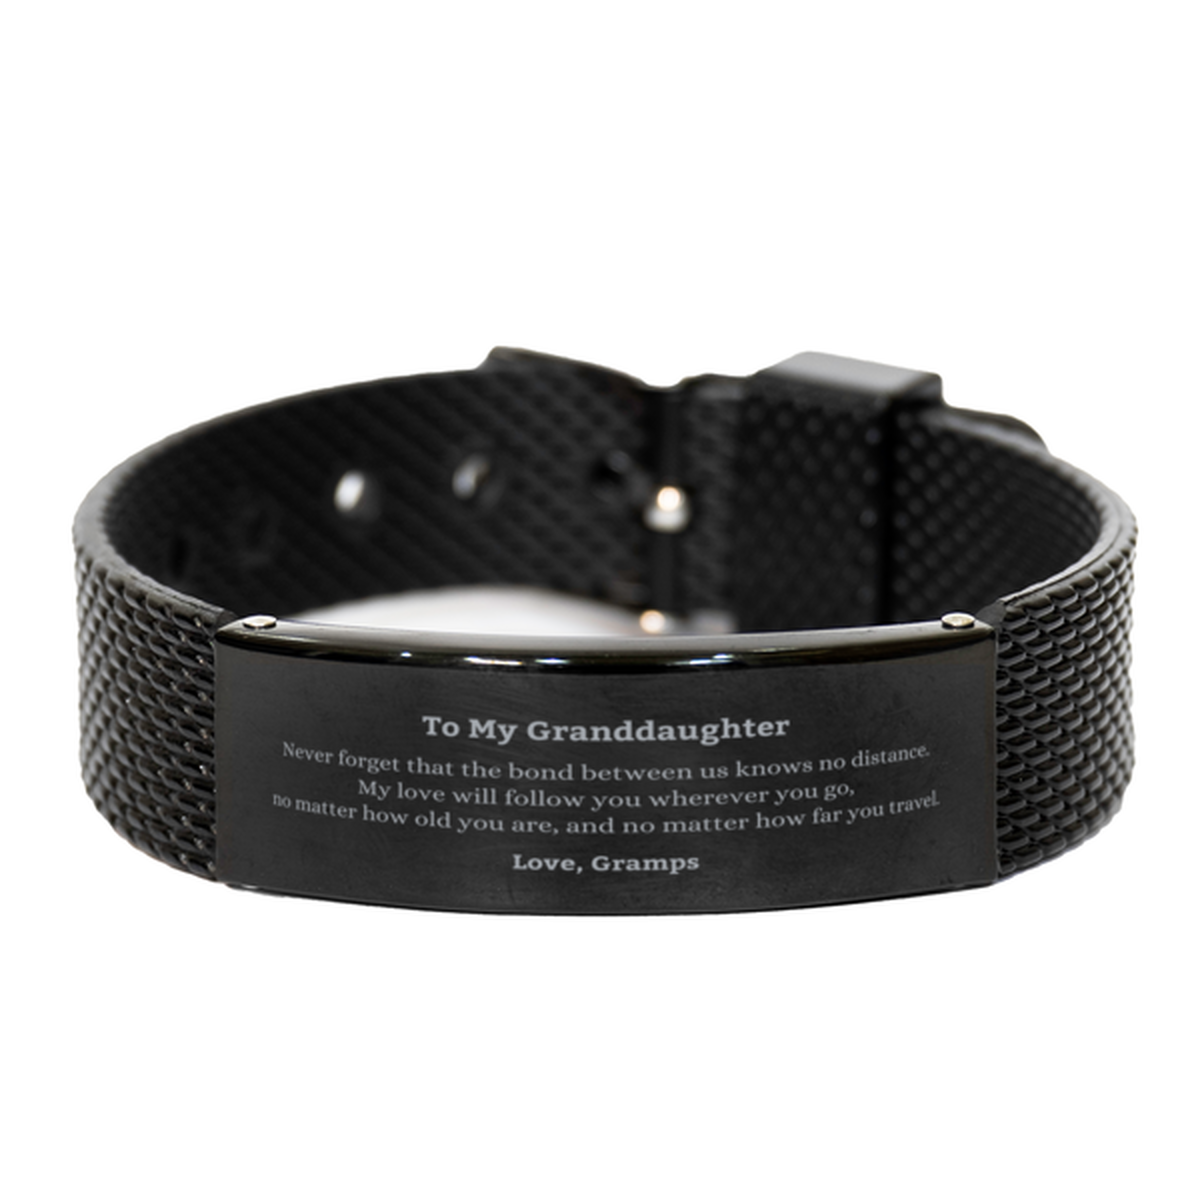 Granddaughter Birthday Gifts from Gramps, Adjustable Black Shark Mesh Bracelet for Granddaughter Christmas Graduation Unique Gifts Granddaughter Never forget that the bond between us knows no distance. Love, Gramps